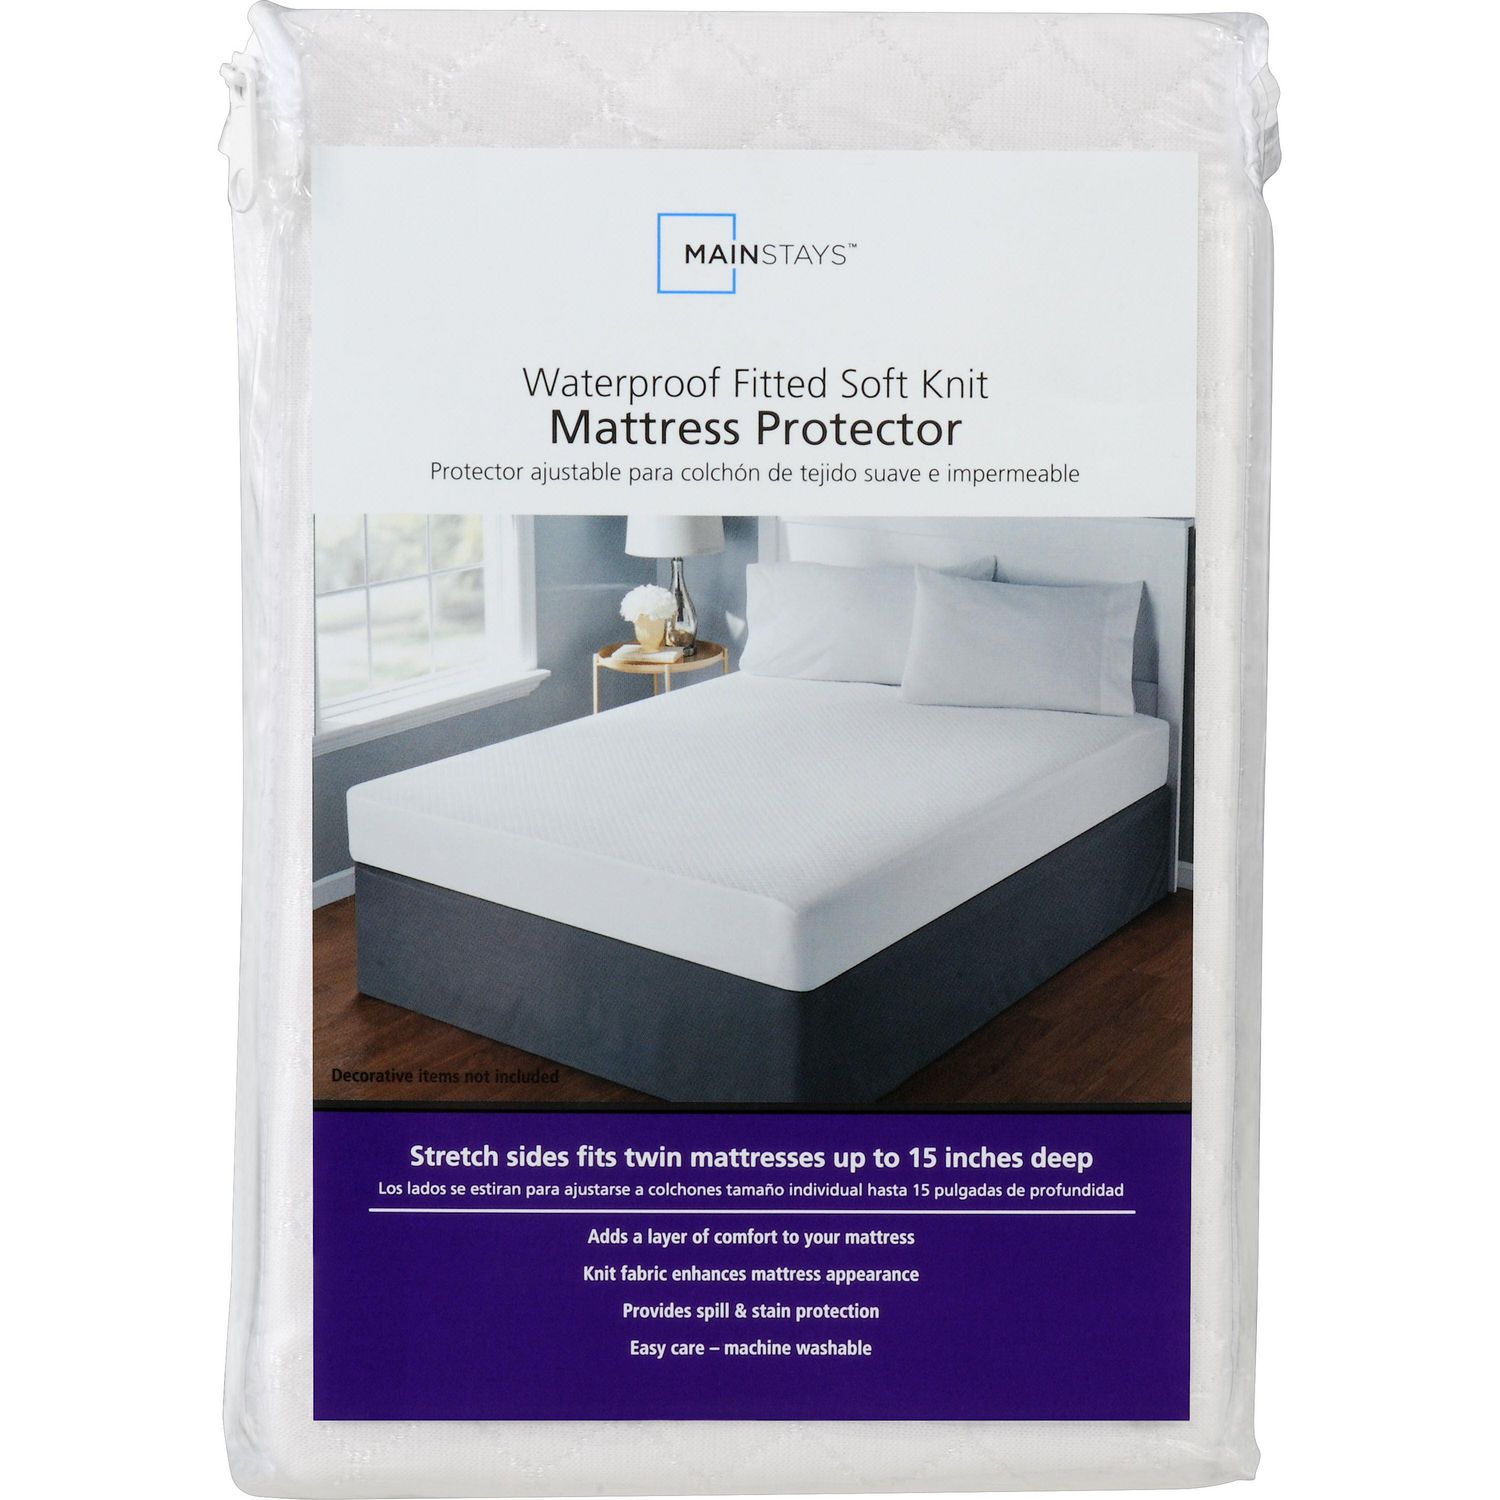 Mainstays Waterproof Fitted Soft Knit Mattress Protector | Walmart Canada